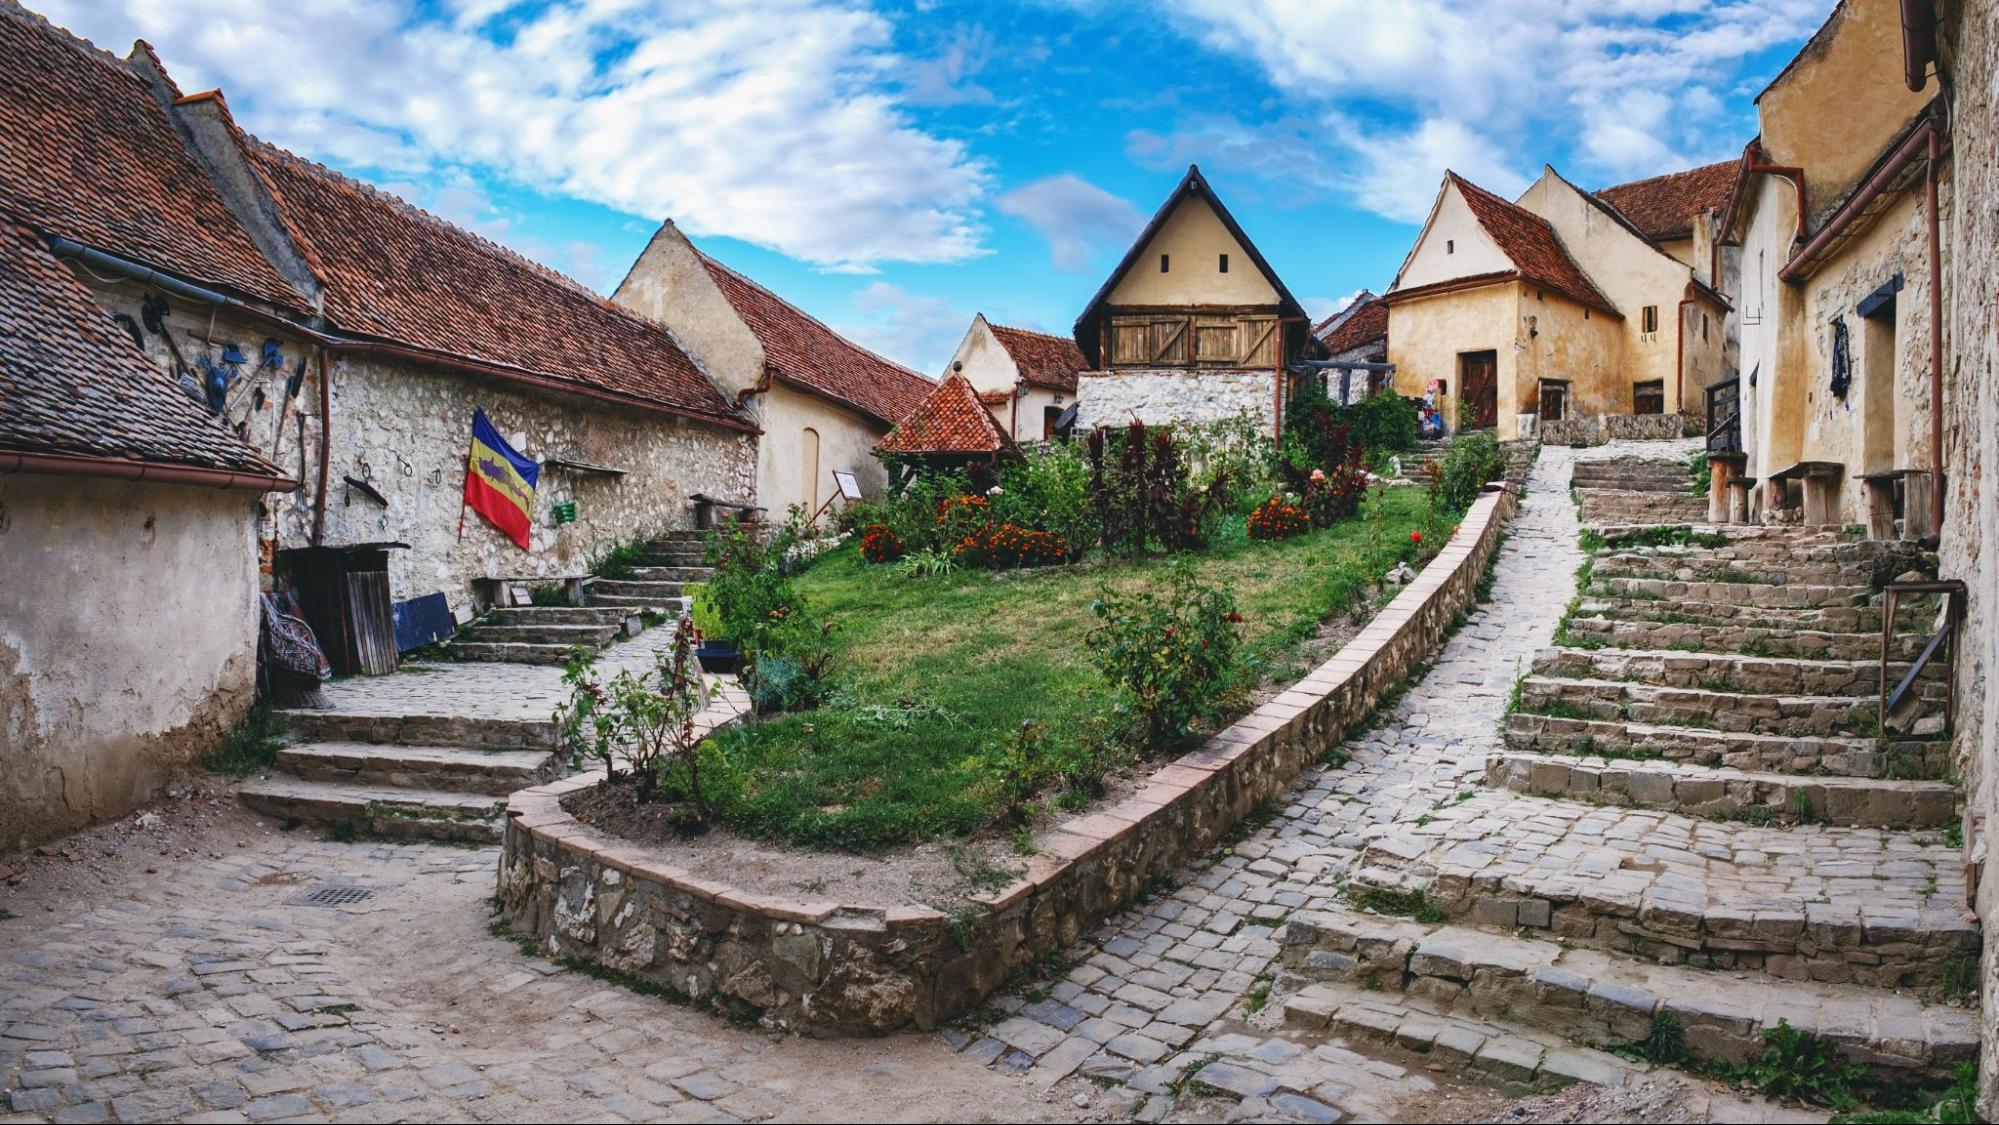 Rasnov Fortress with beautiful medieval stone houses and stone stairway, Brasov county, Romania. Panoramic view